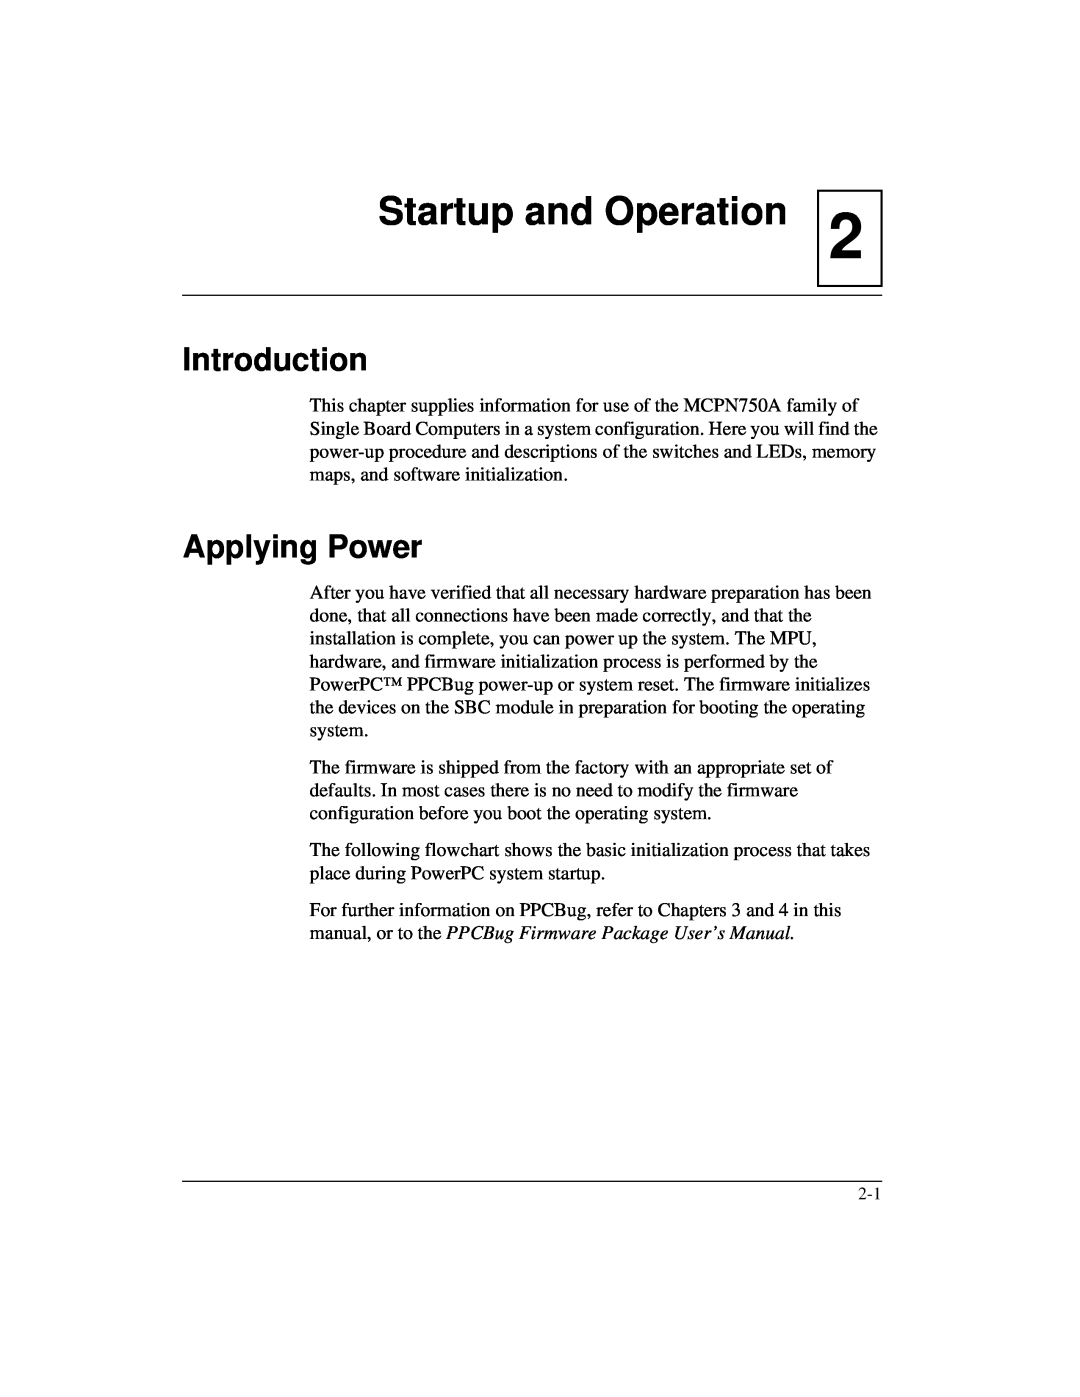 Motorola IH5, MCPN750A manual Startup and Operation, Applying Power, Introduction 